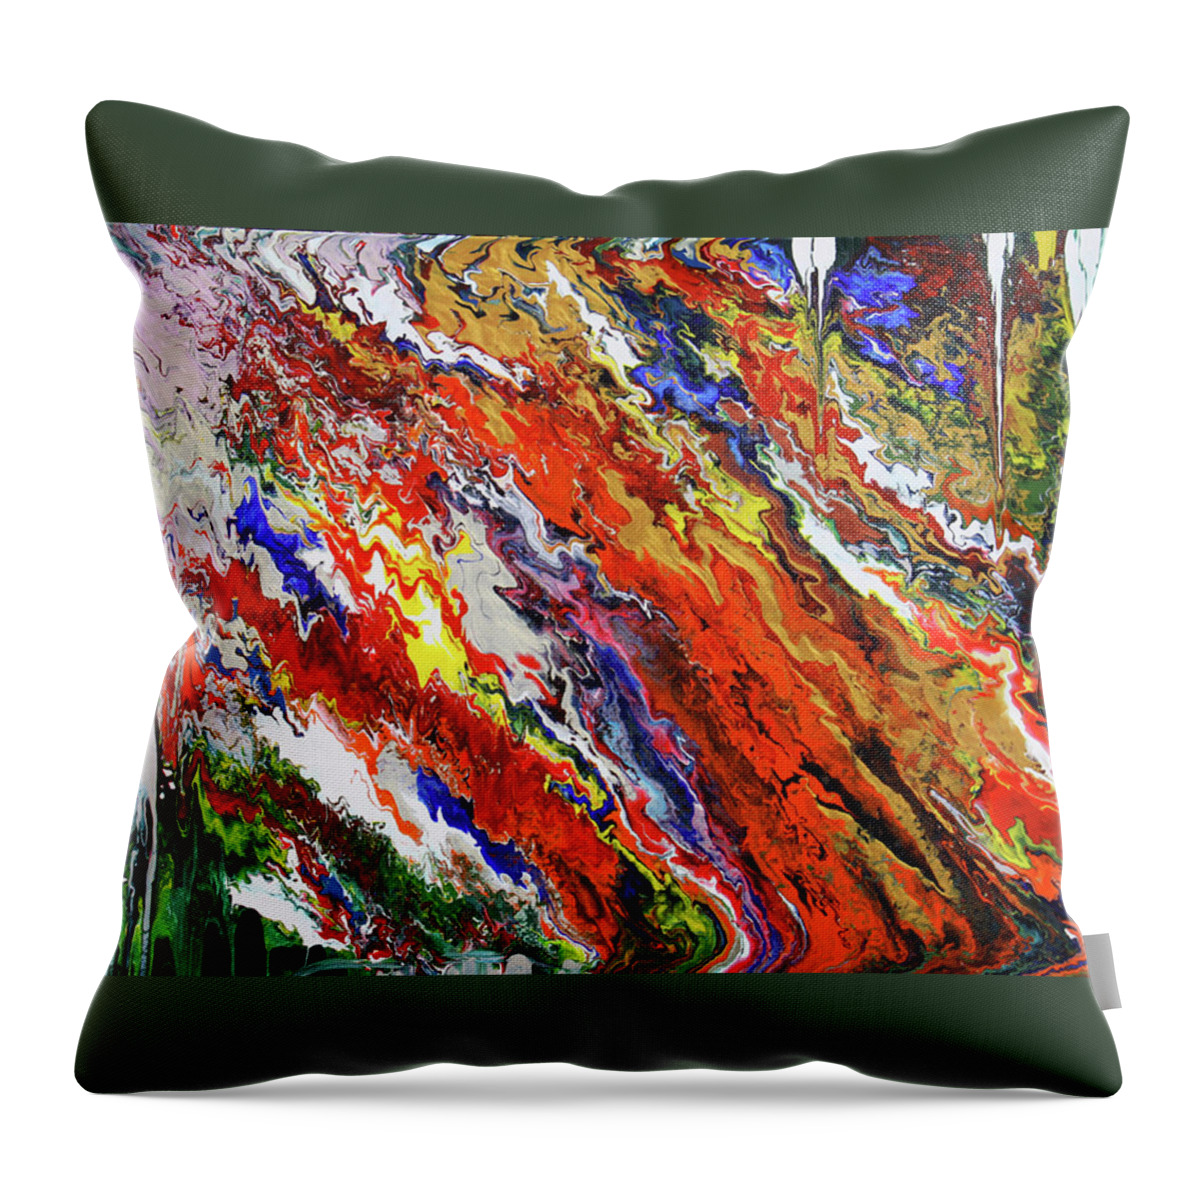 Fusionart Throw Pillow featuring the painting Amplify by Ralph White